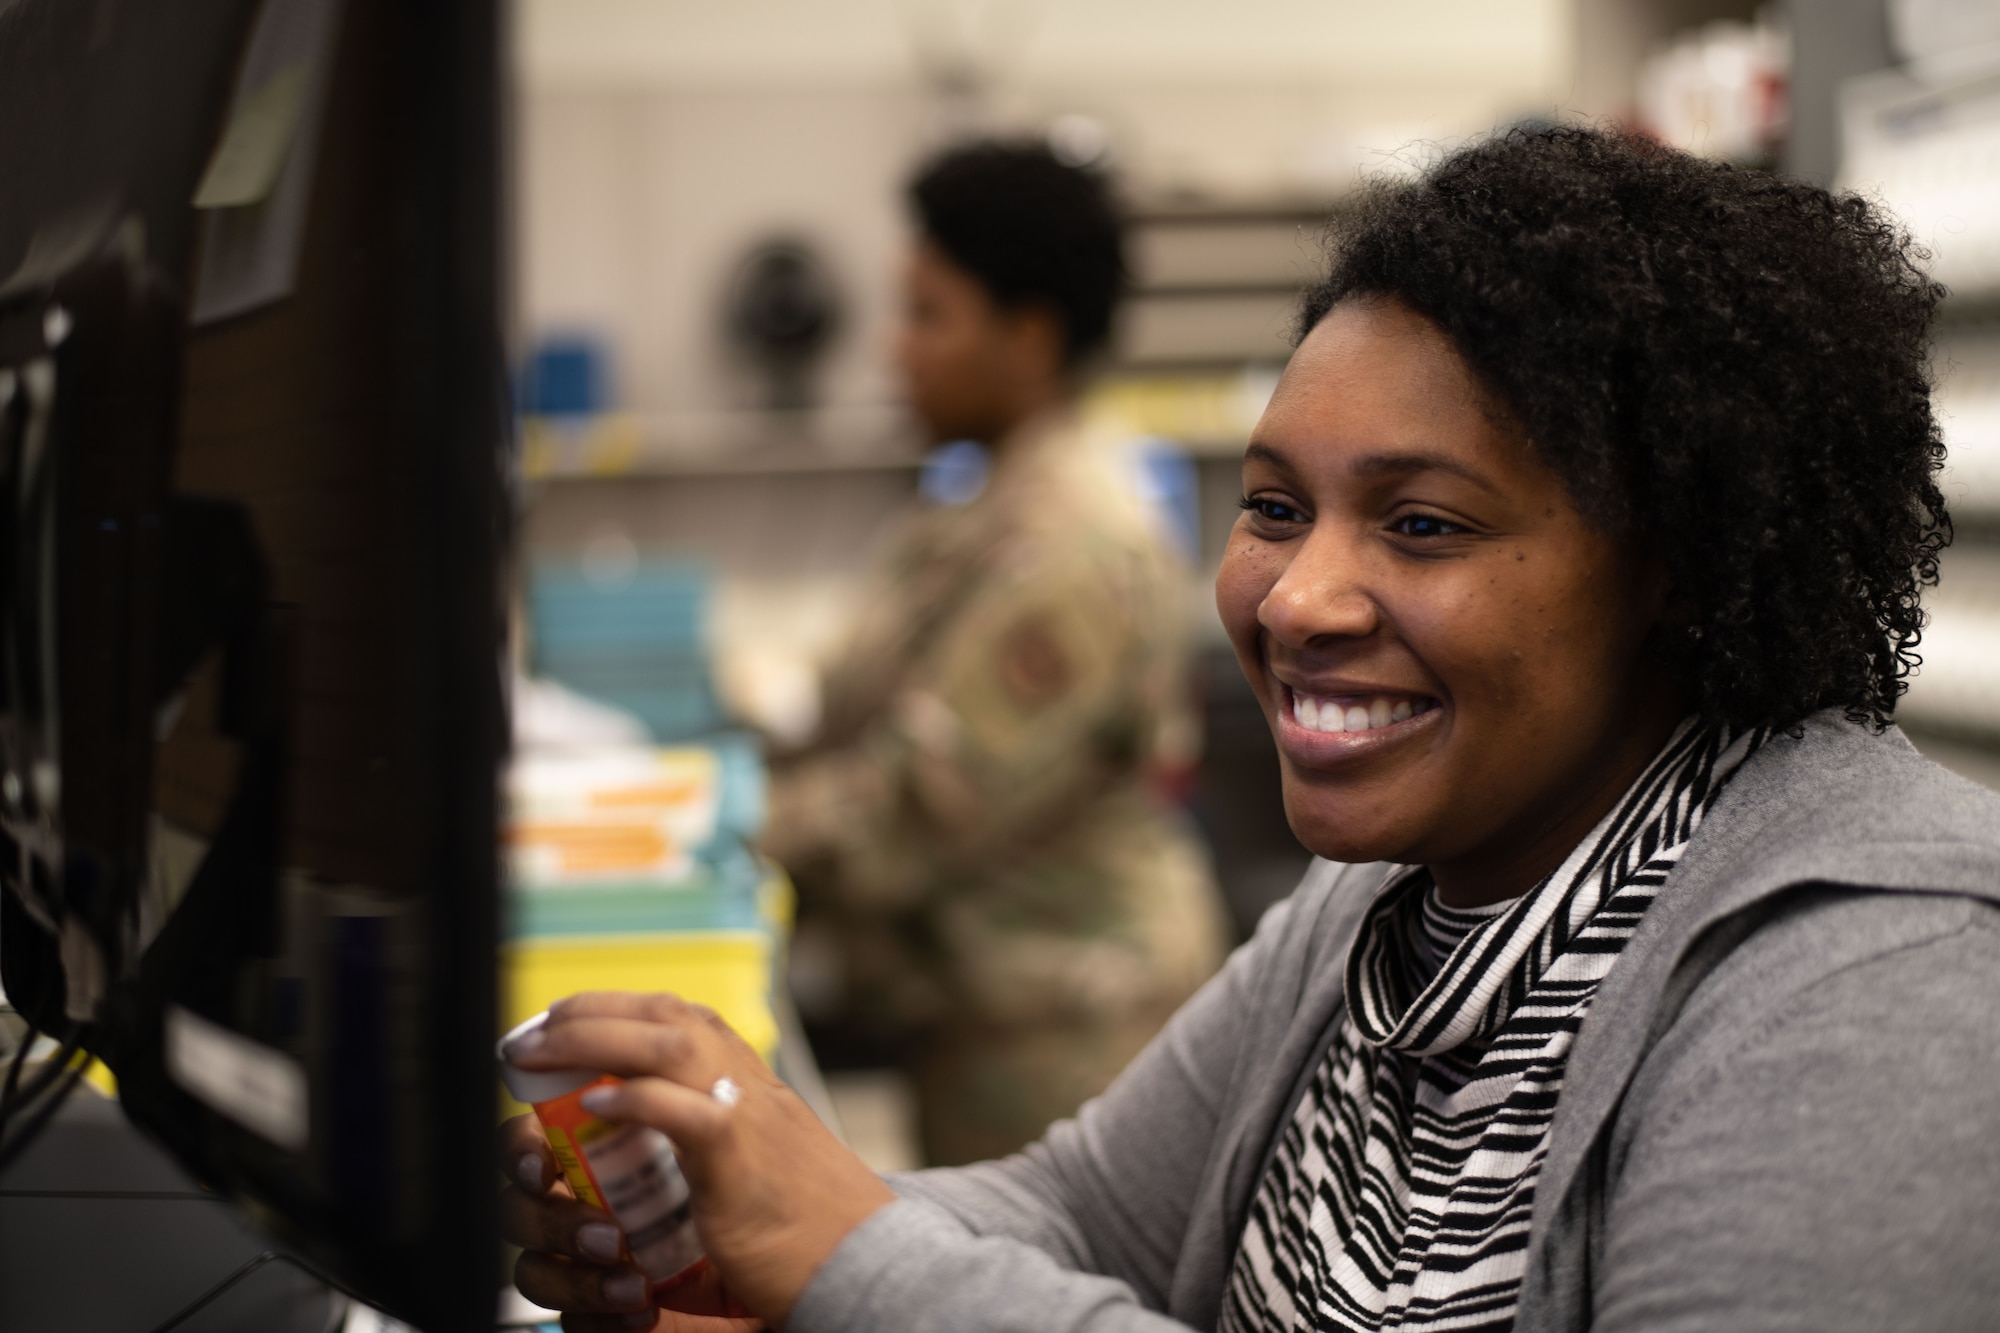 Gabrielle Ervin, Maxwell Pharmacist, looks over a patient’s information while sorting prescriptions at the Maxwell Pharmacy, Dec. 19, 2019, Maxwell Air Force Base, Alabama. The Maxwell Pharmacy is responsible for serving the 42nd Air Base Wing, Air University and all of the other tenant units on base, as well as communities across the state of Alabama. (U.S. Air Force photo by Senior Airman Alexa Culbert)